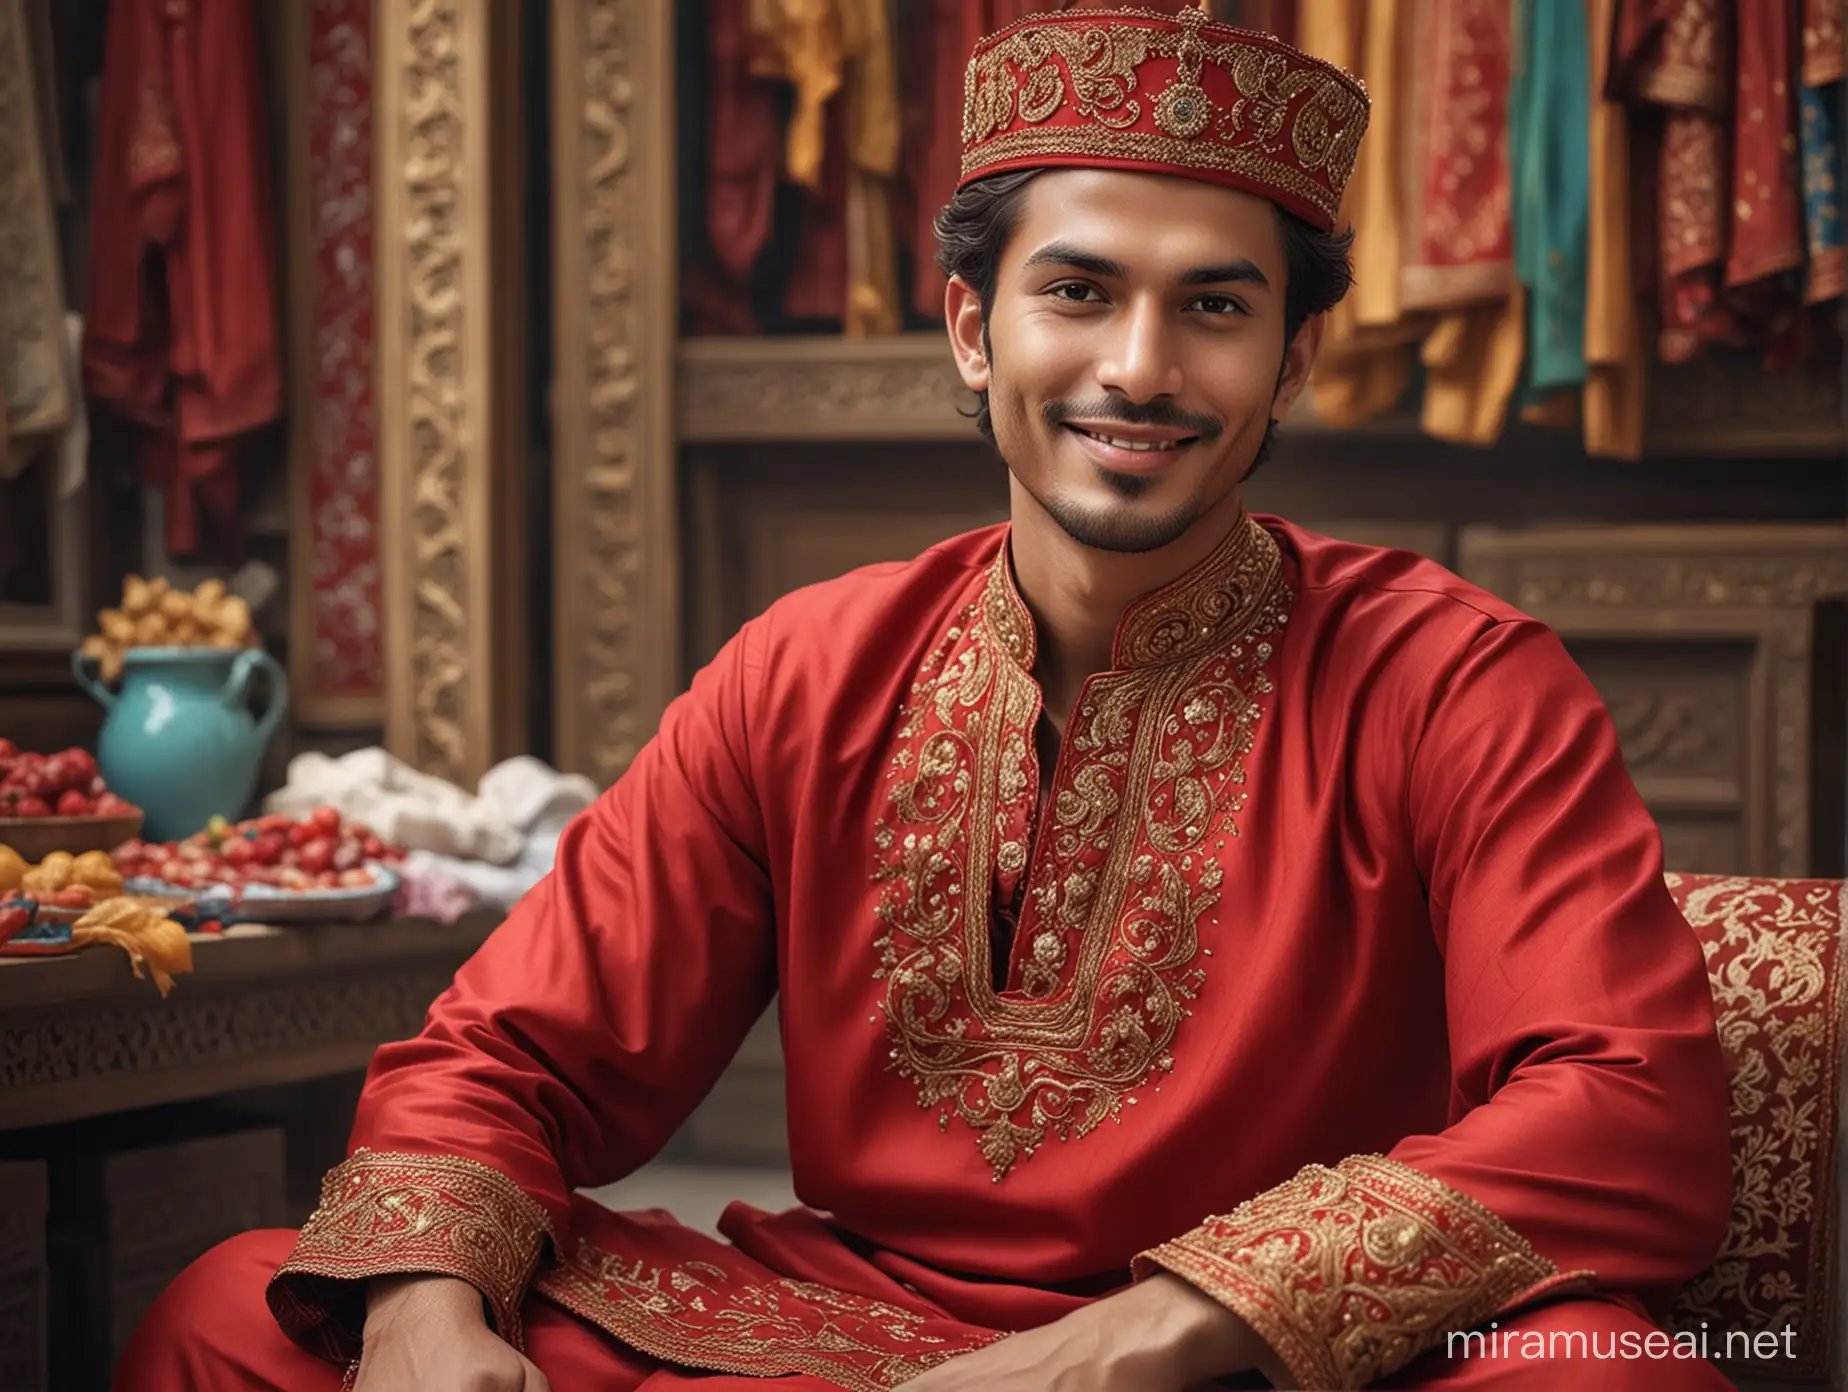  masterpiece, best quality, Red Devil, Satan representation, Realistic photo style, body full red , Sitting in the middle of Asian market shrewdly smiling , front facing, face to face, wearing traditional Pakistani male dress, salwar and kameez middle of the photo, body shows from belly to head, silghty large body meaningful, impactful, crisp, defined linework, random frayed edges, torn edges, regal ornamentation, professional color grading, (photographic, photogenic))), extremely high quality, high detail RAW color photo